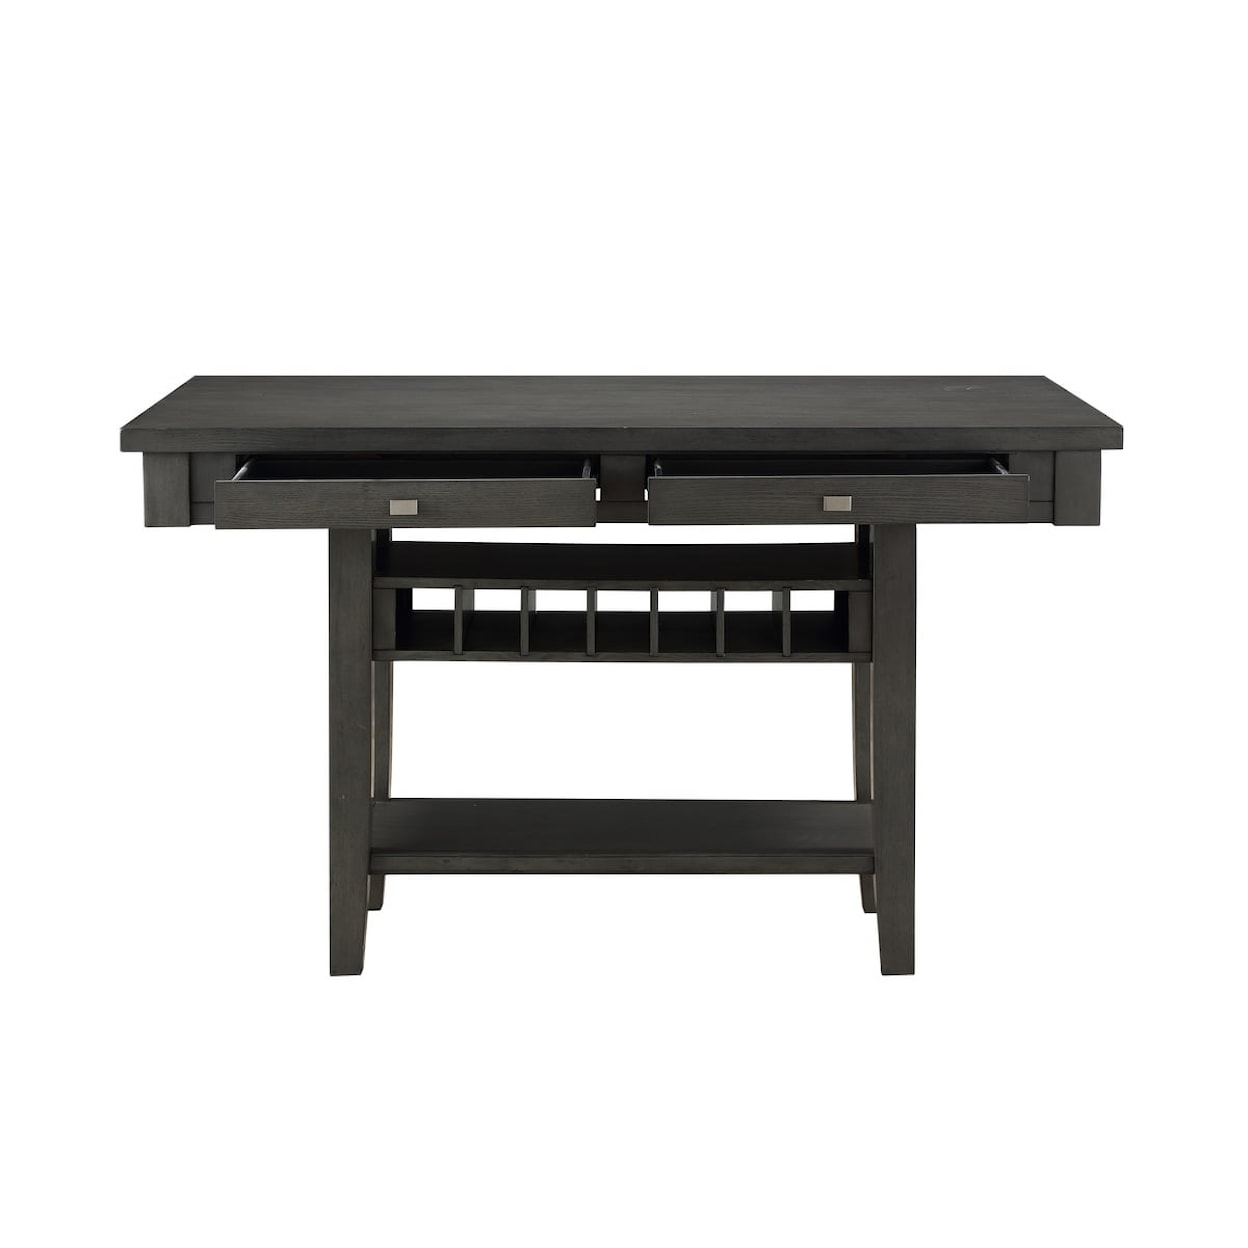 Homelegance Furniture Baresford Counter Height Table